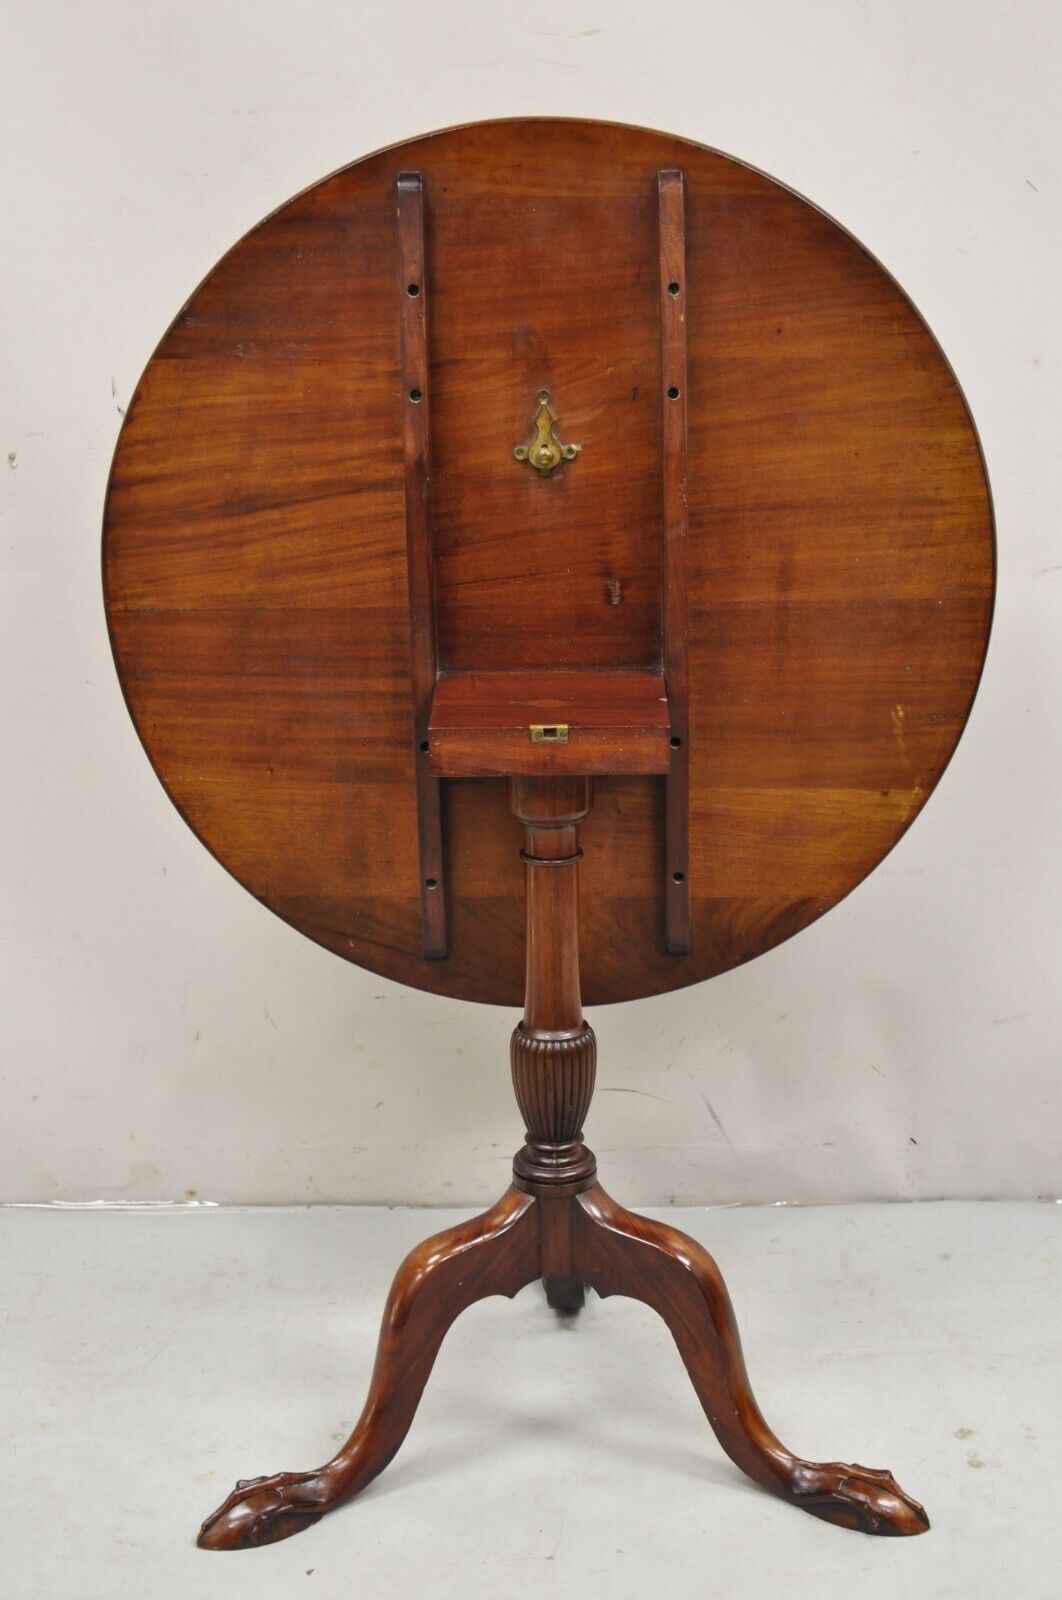 Antique Chippendale Style Round Tilt Top Pinwheel Inlay Ball and Claw Side Table